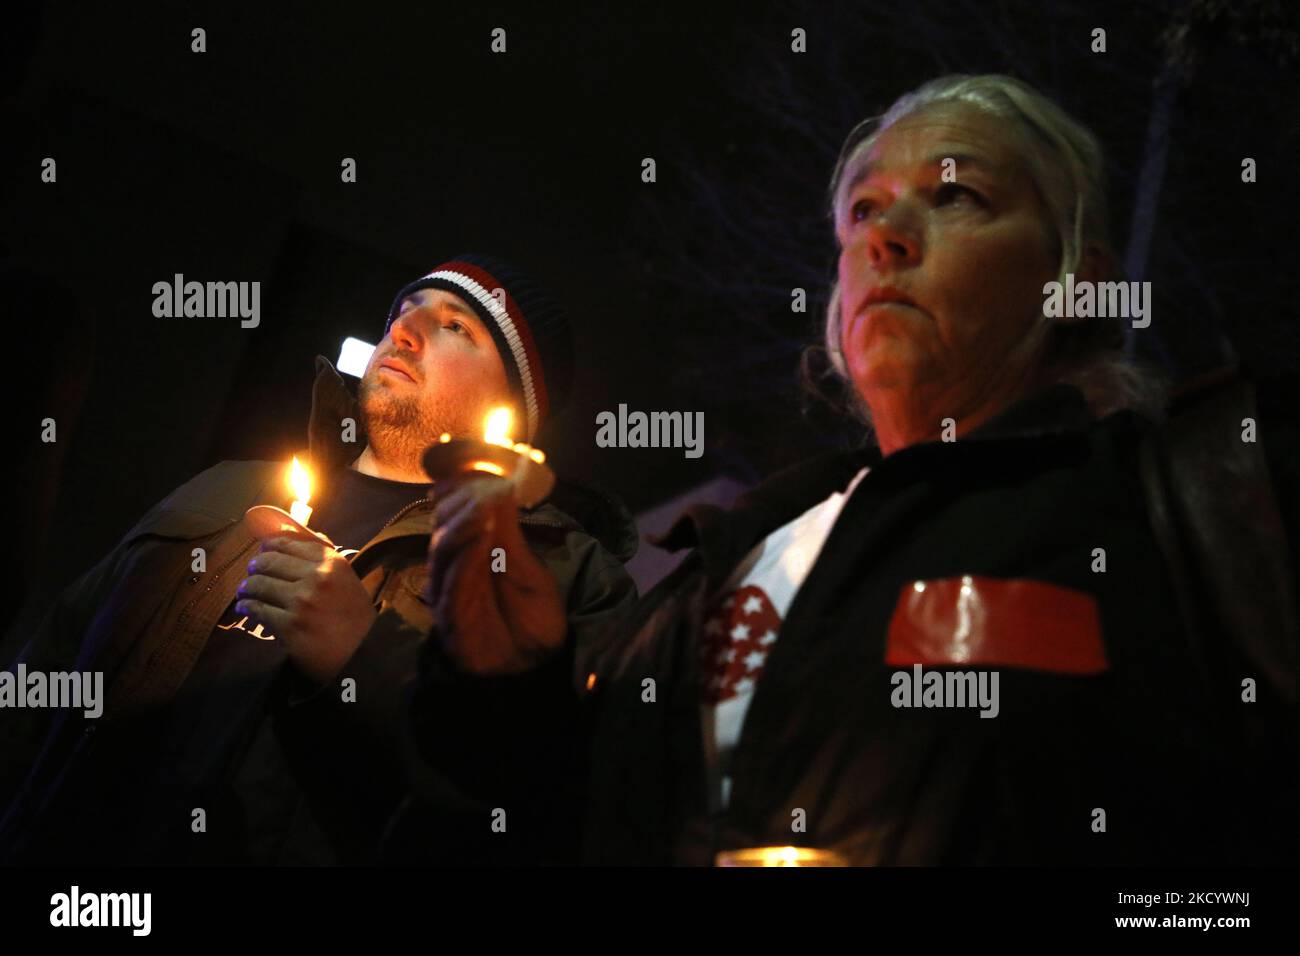 The mother of Ashli Babbitt who was killed by Capitol Police attends a vigil sponsored by “Look Ahead America” outside of the DC Central Detention Facility claiming that those charged for the January 6 ,2021 attack are treated unfairly on January 6, 2022 in Washington DC, USA . Public vigils in DC and around the country have been held in remembrance of the rally for the anti-ratification of President Joe Biden’s Electoral College victory over the former President Donald Trump. President Biden as well as lawmakers delivered remarks and held a moment of silence on the House floor for those lost  Stock Photo